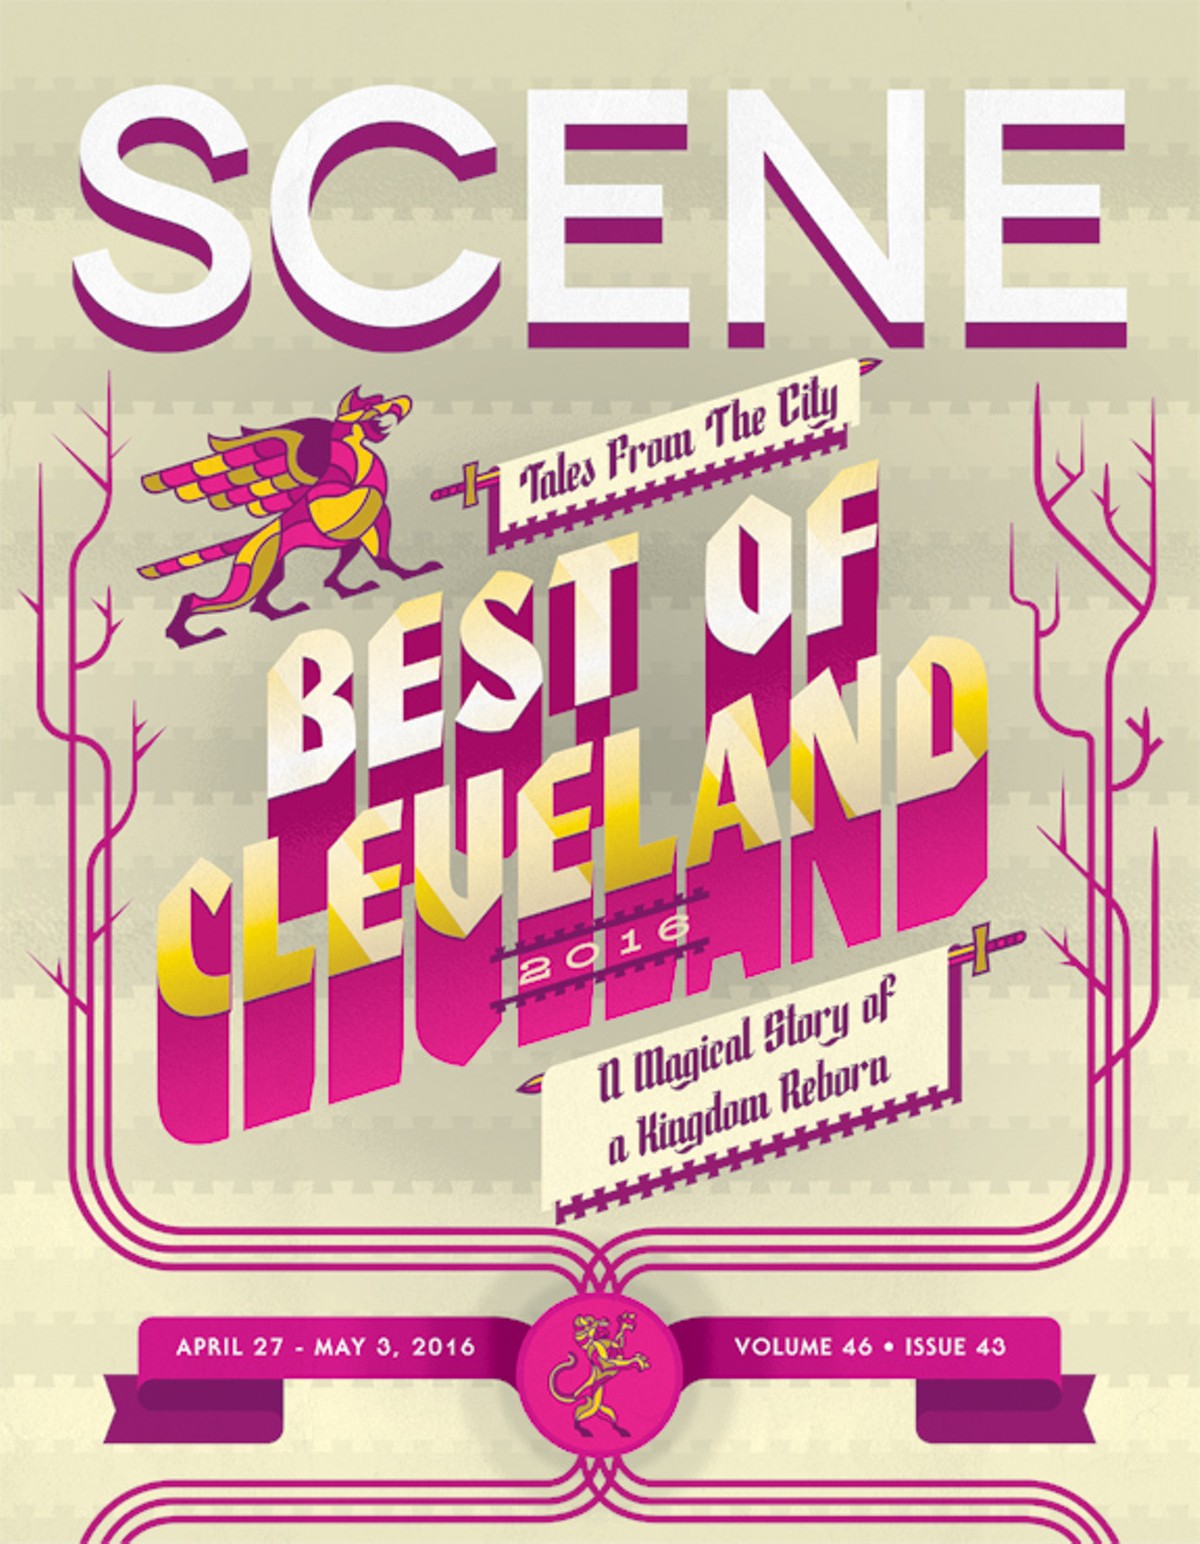 Best of Cleveland 2016 Issue Cover